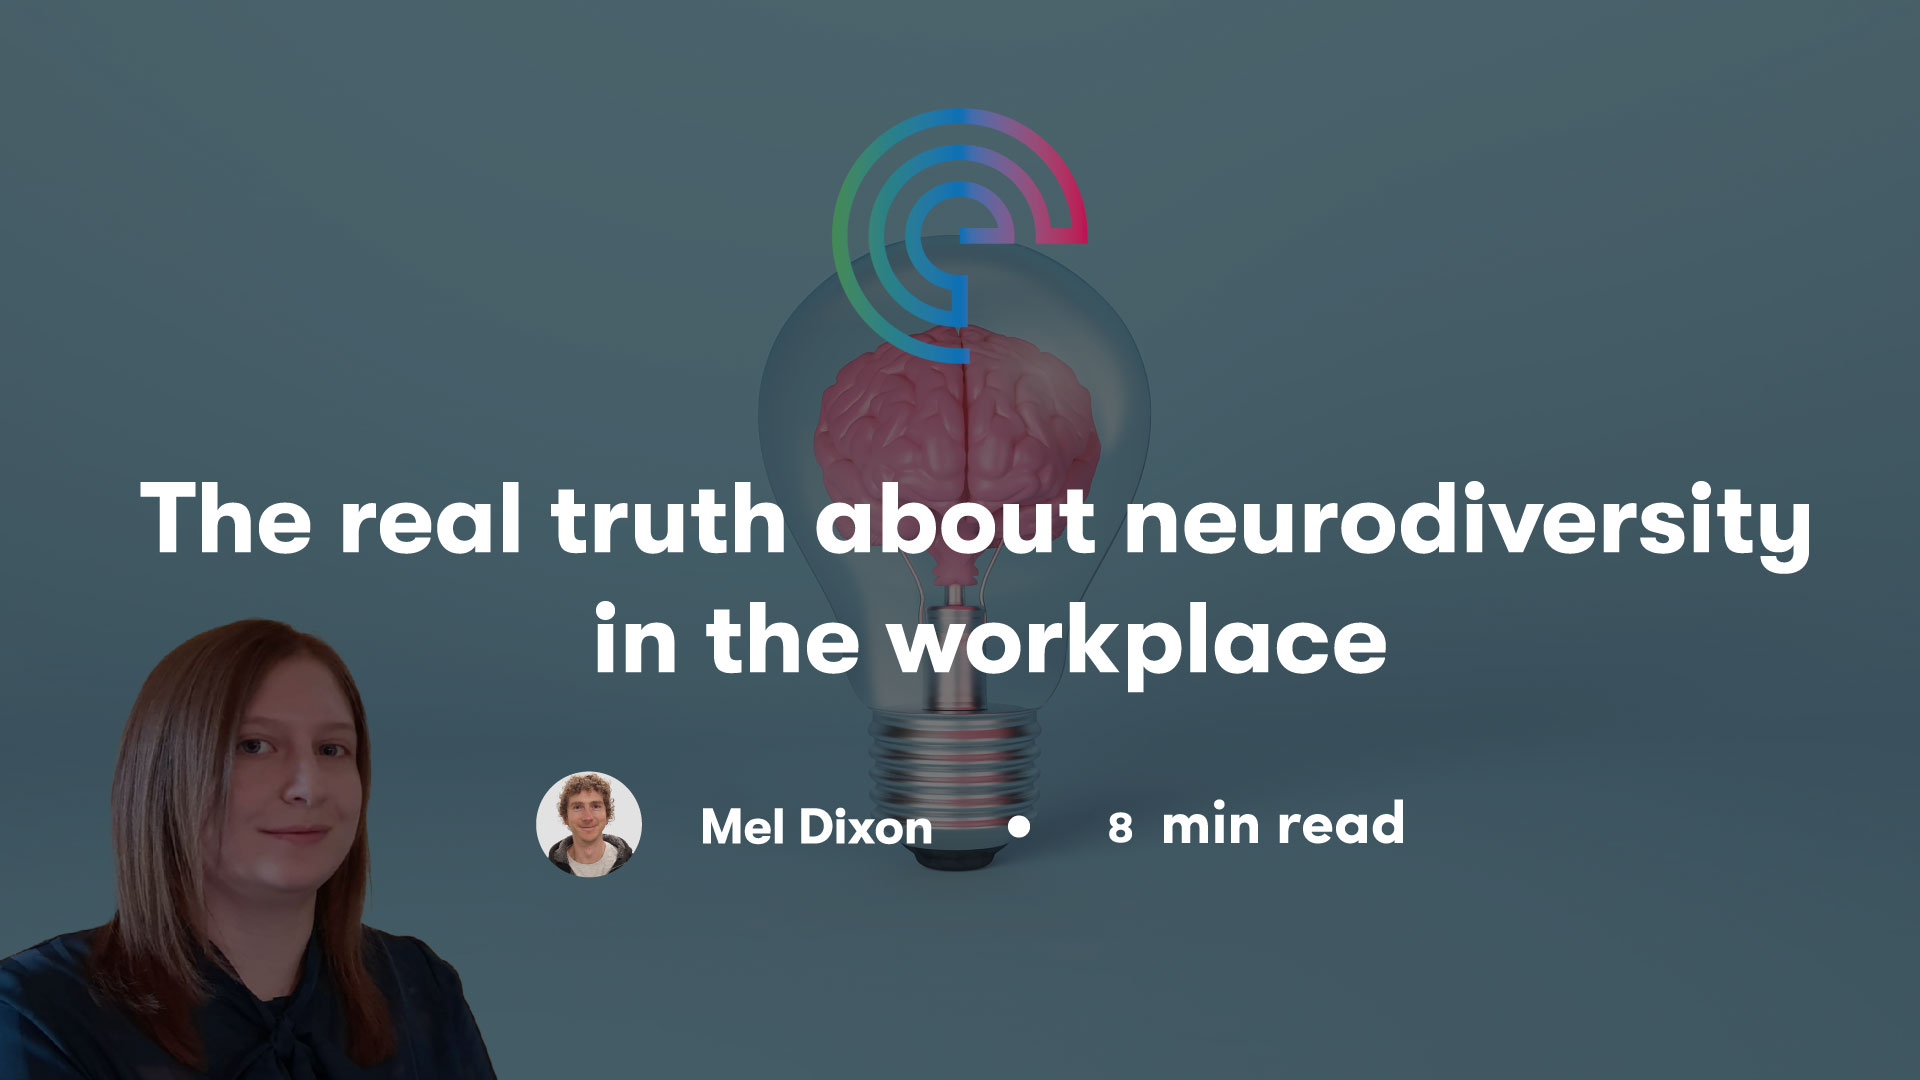 The real truth about neurodiversity in the workplace featuring Joanne